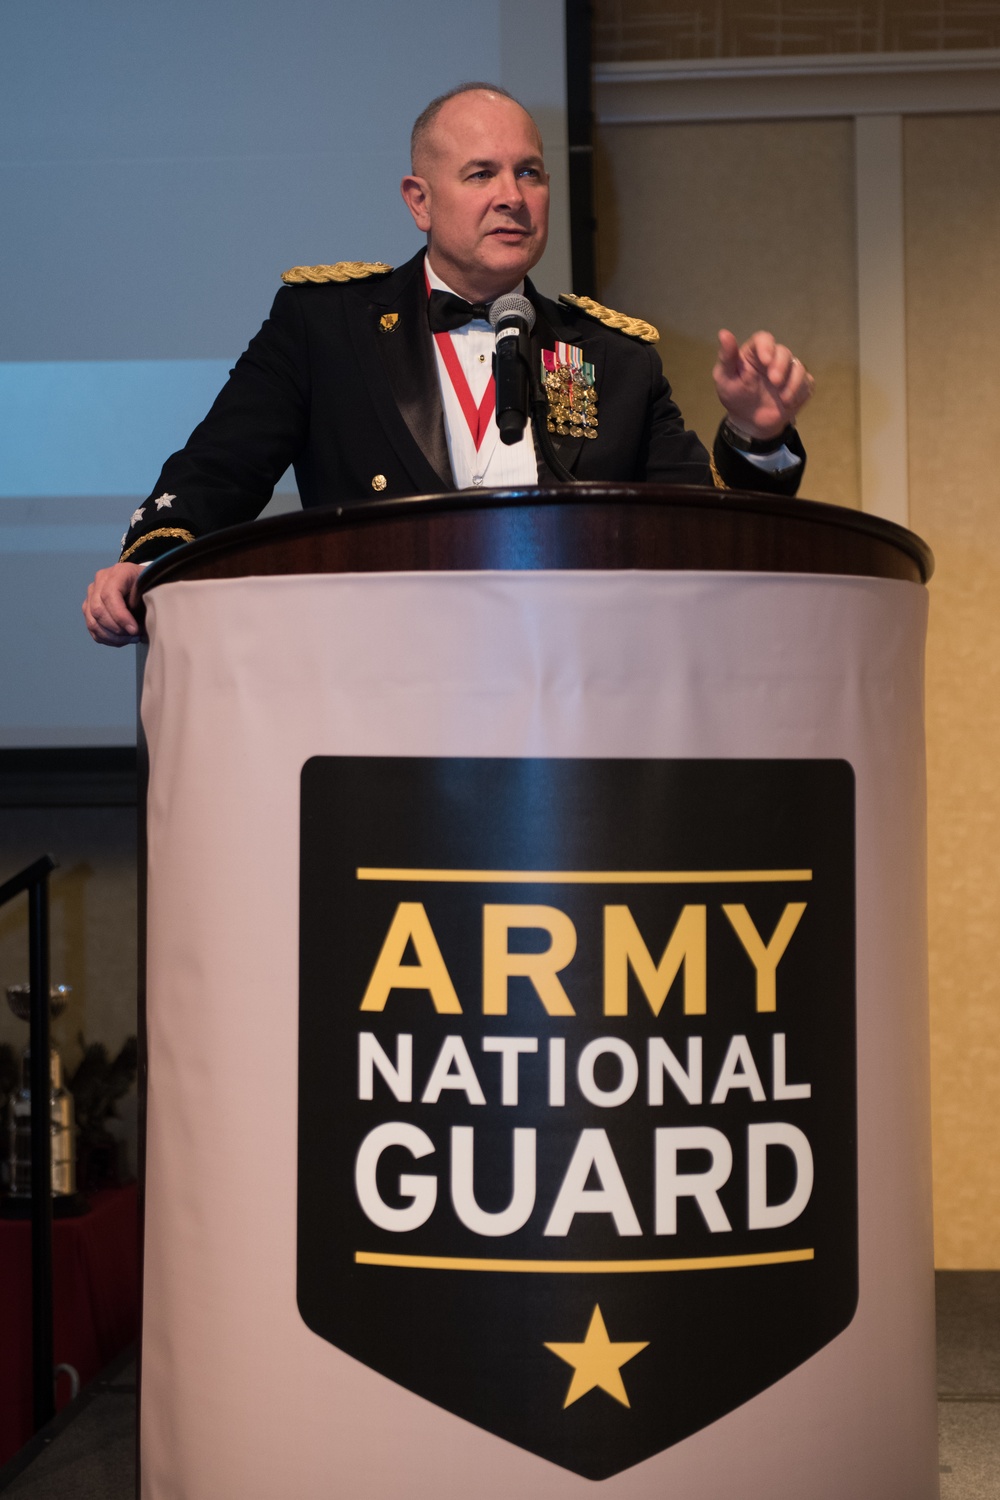 Lt. Gen. Timothy Kadavy, the director of the Army National Guard, recognized the Army Guard’s top recruiters